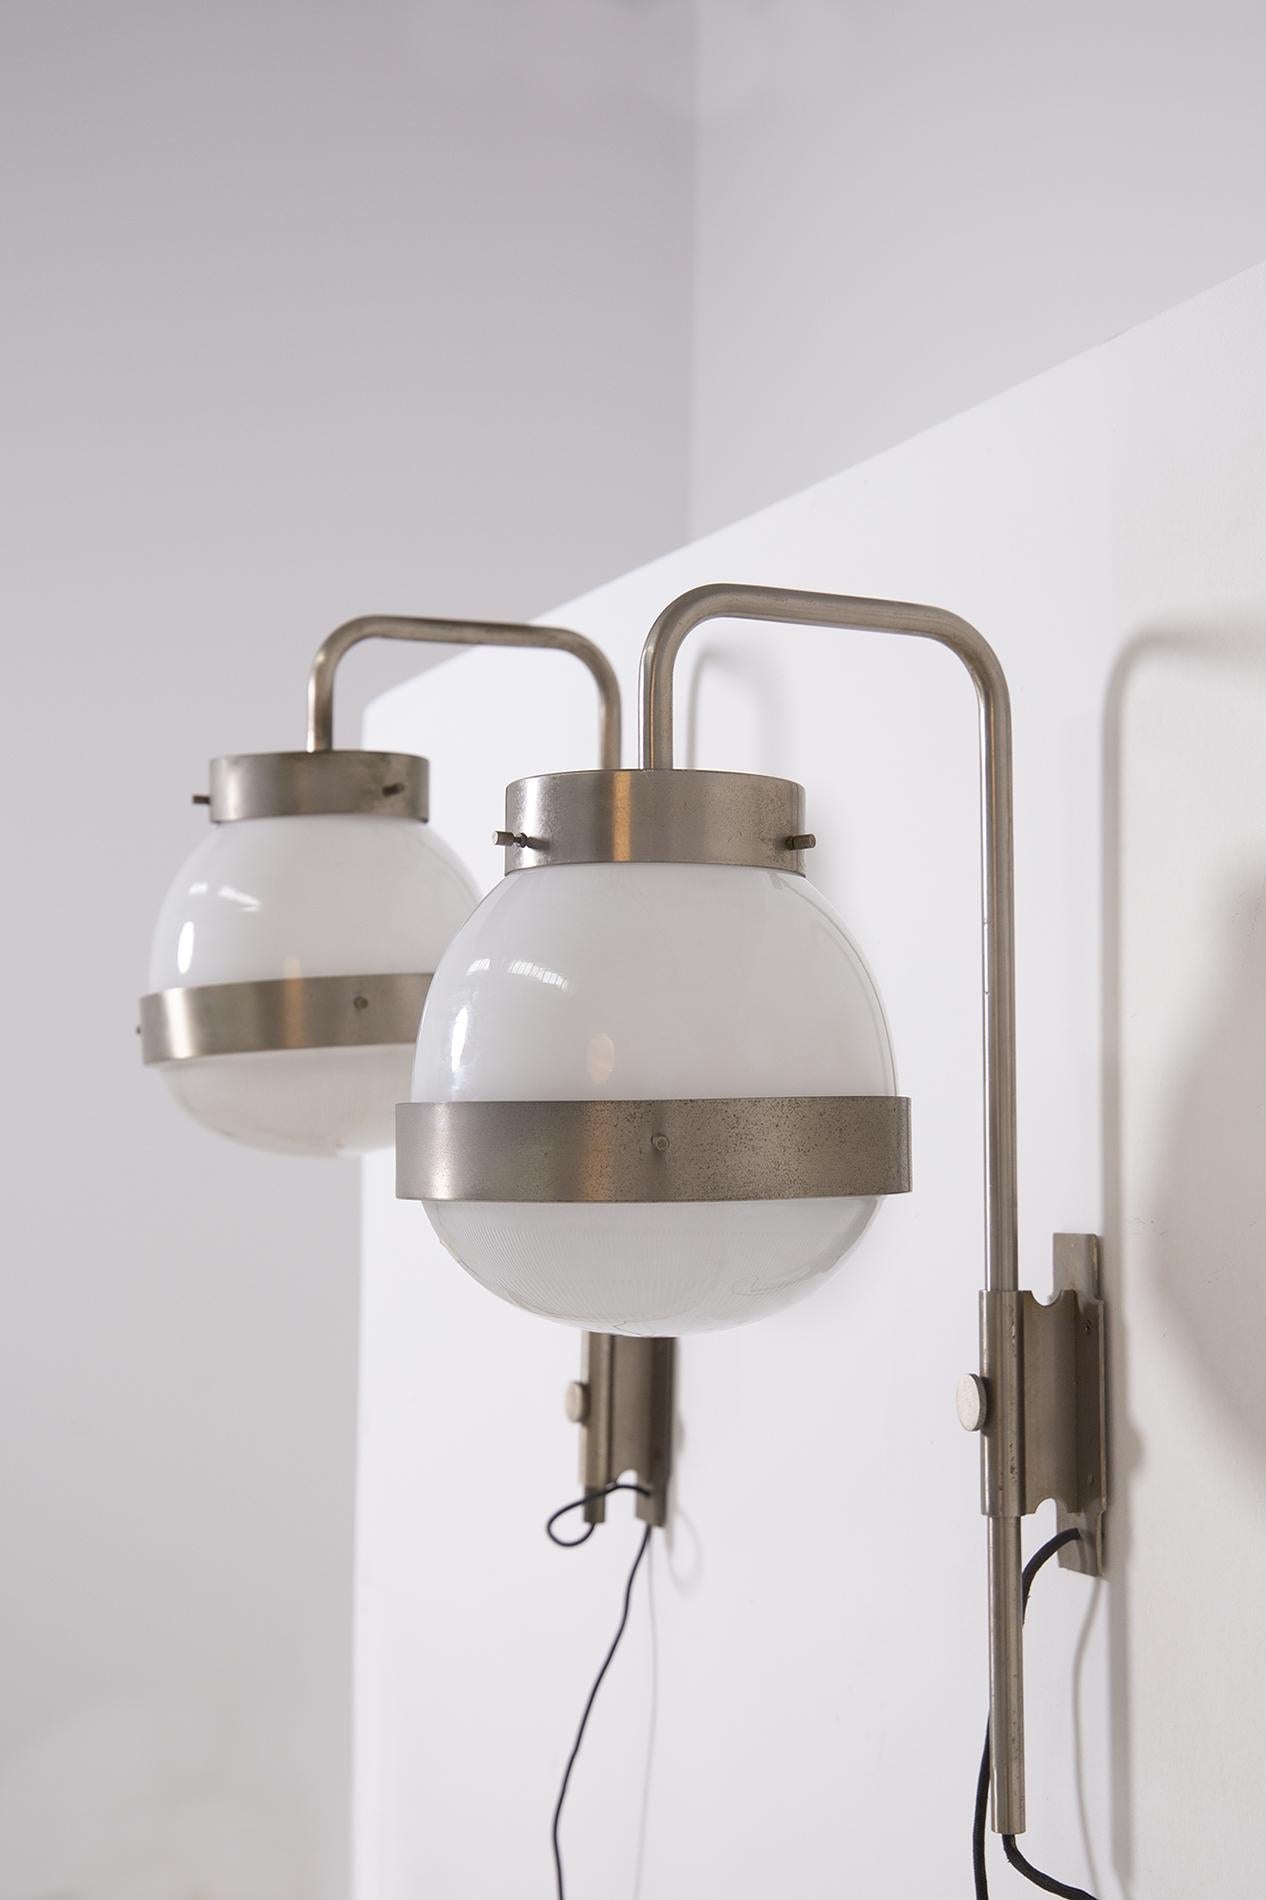 Pair of wall sconces designed by designer Mazza Sergio for Artemide manufacture in 1960. The wall lights are the Delta model and are adjustable in height thanks to its knob mechanism that allows the adjustment. The lamps are wall lamps. The